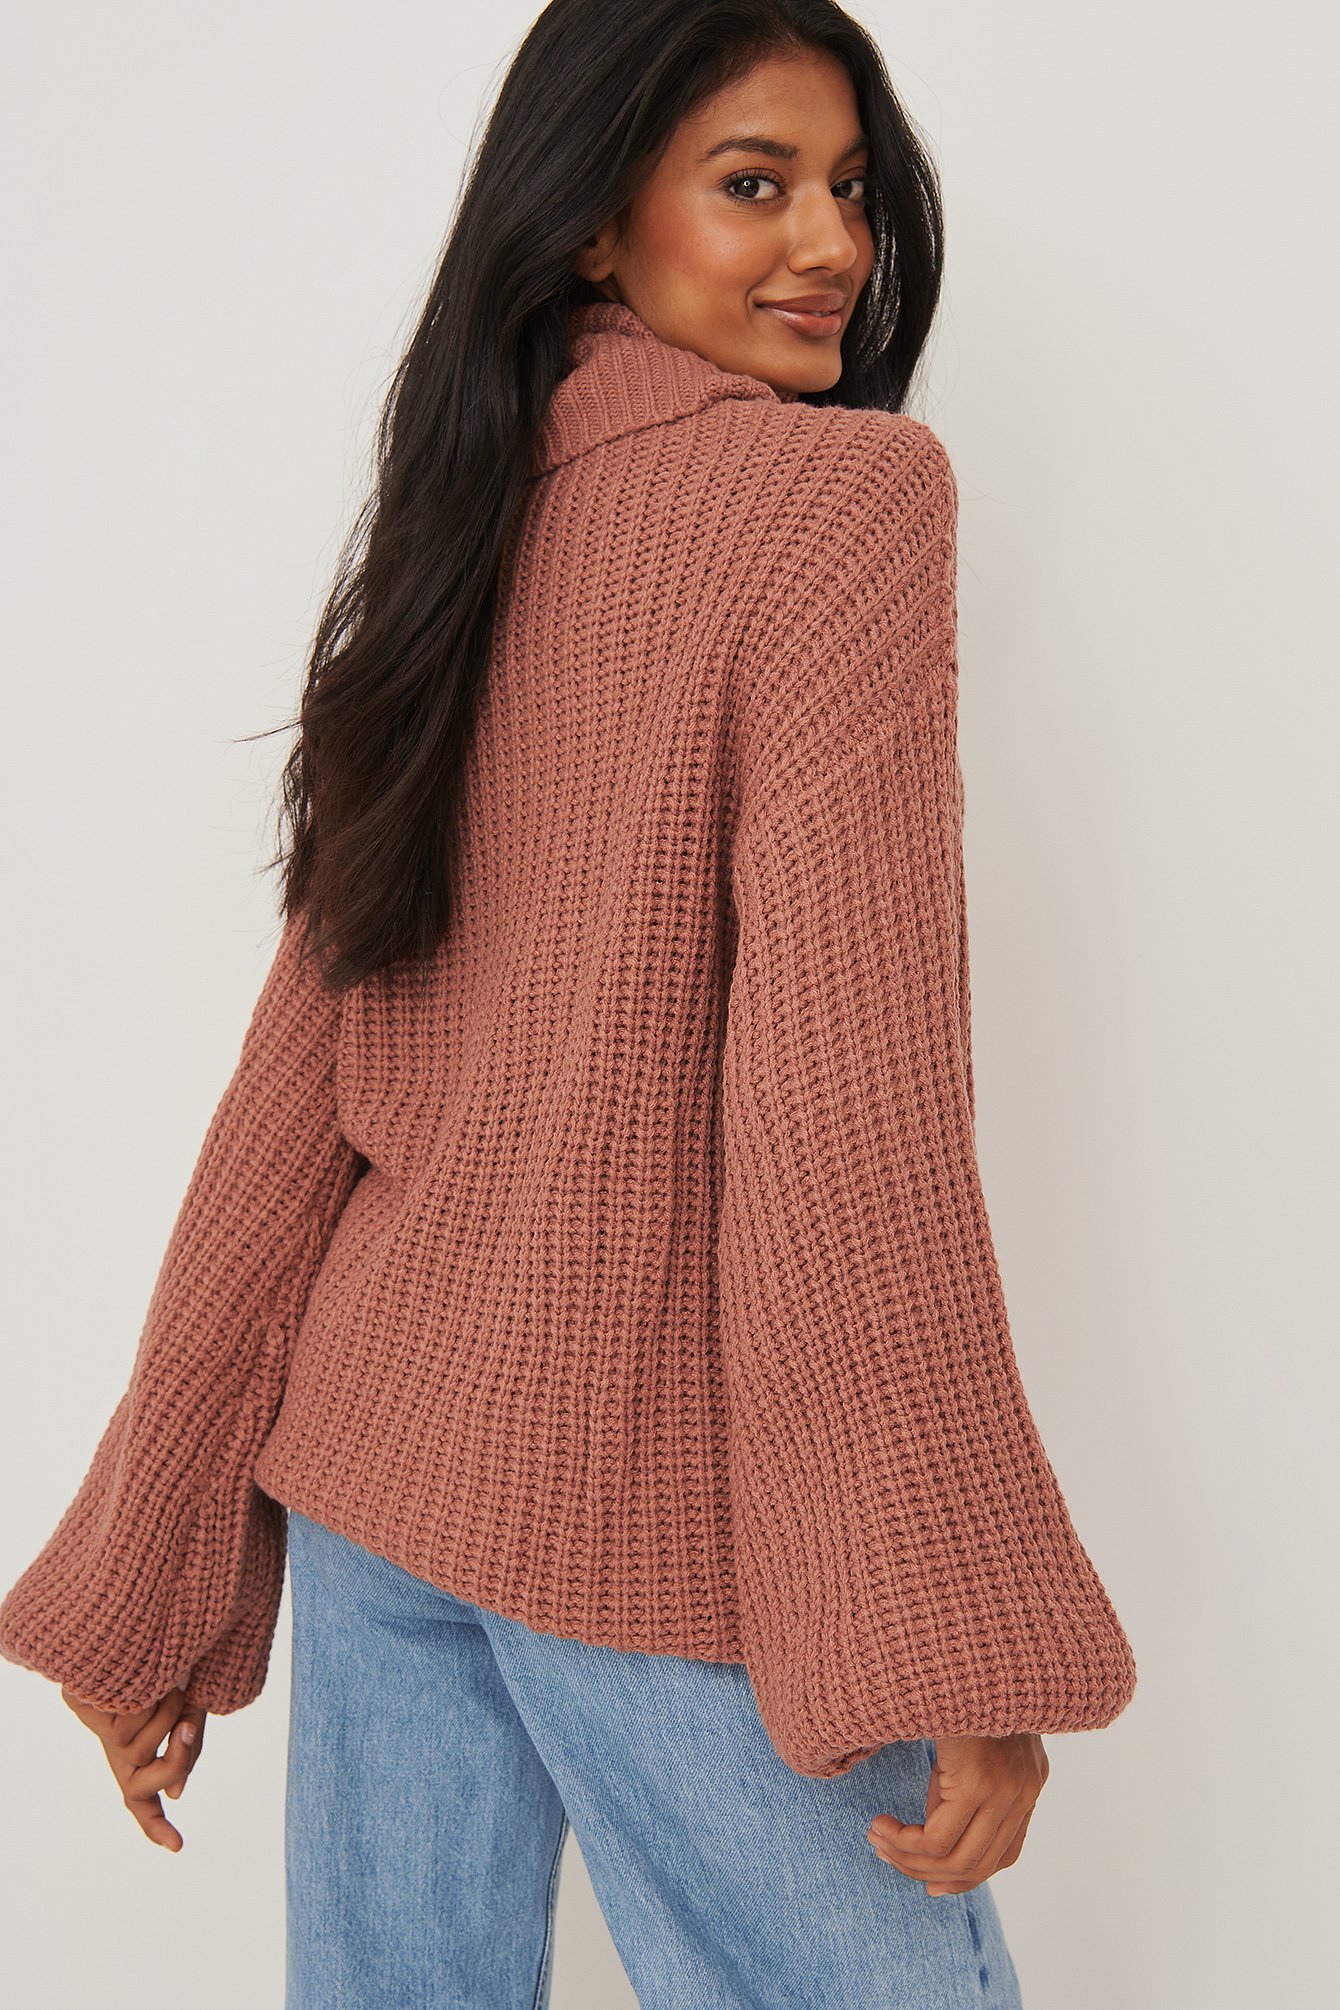 Dusty Dark Pink High Neck Long Knitted Sweater